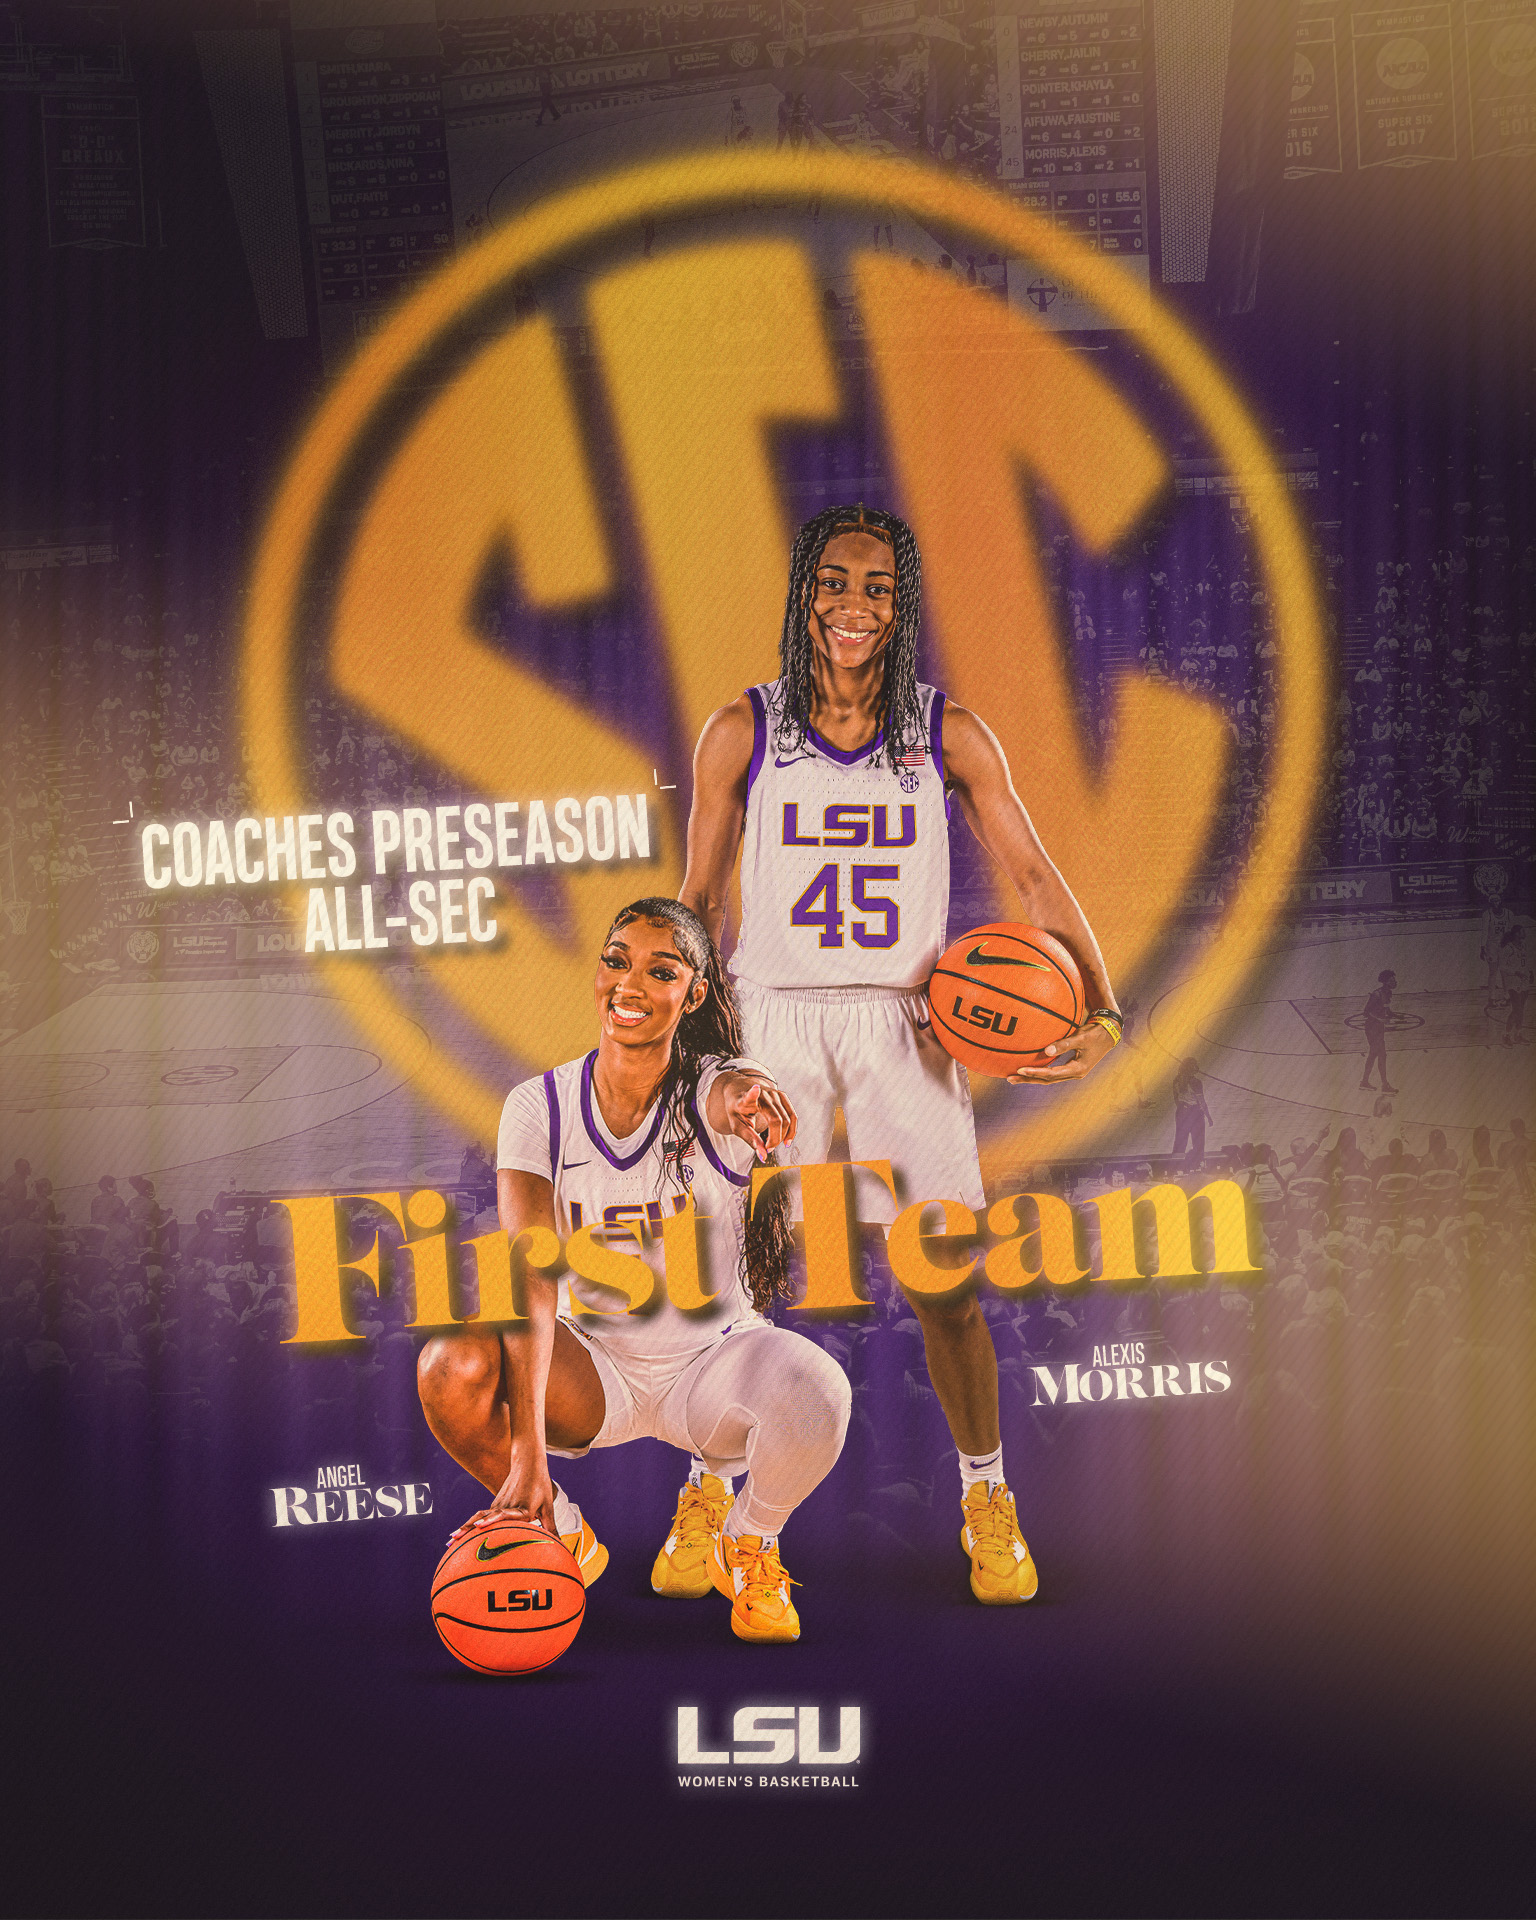 LSU Women's Basketball coaches in the SEC have spoken